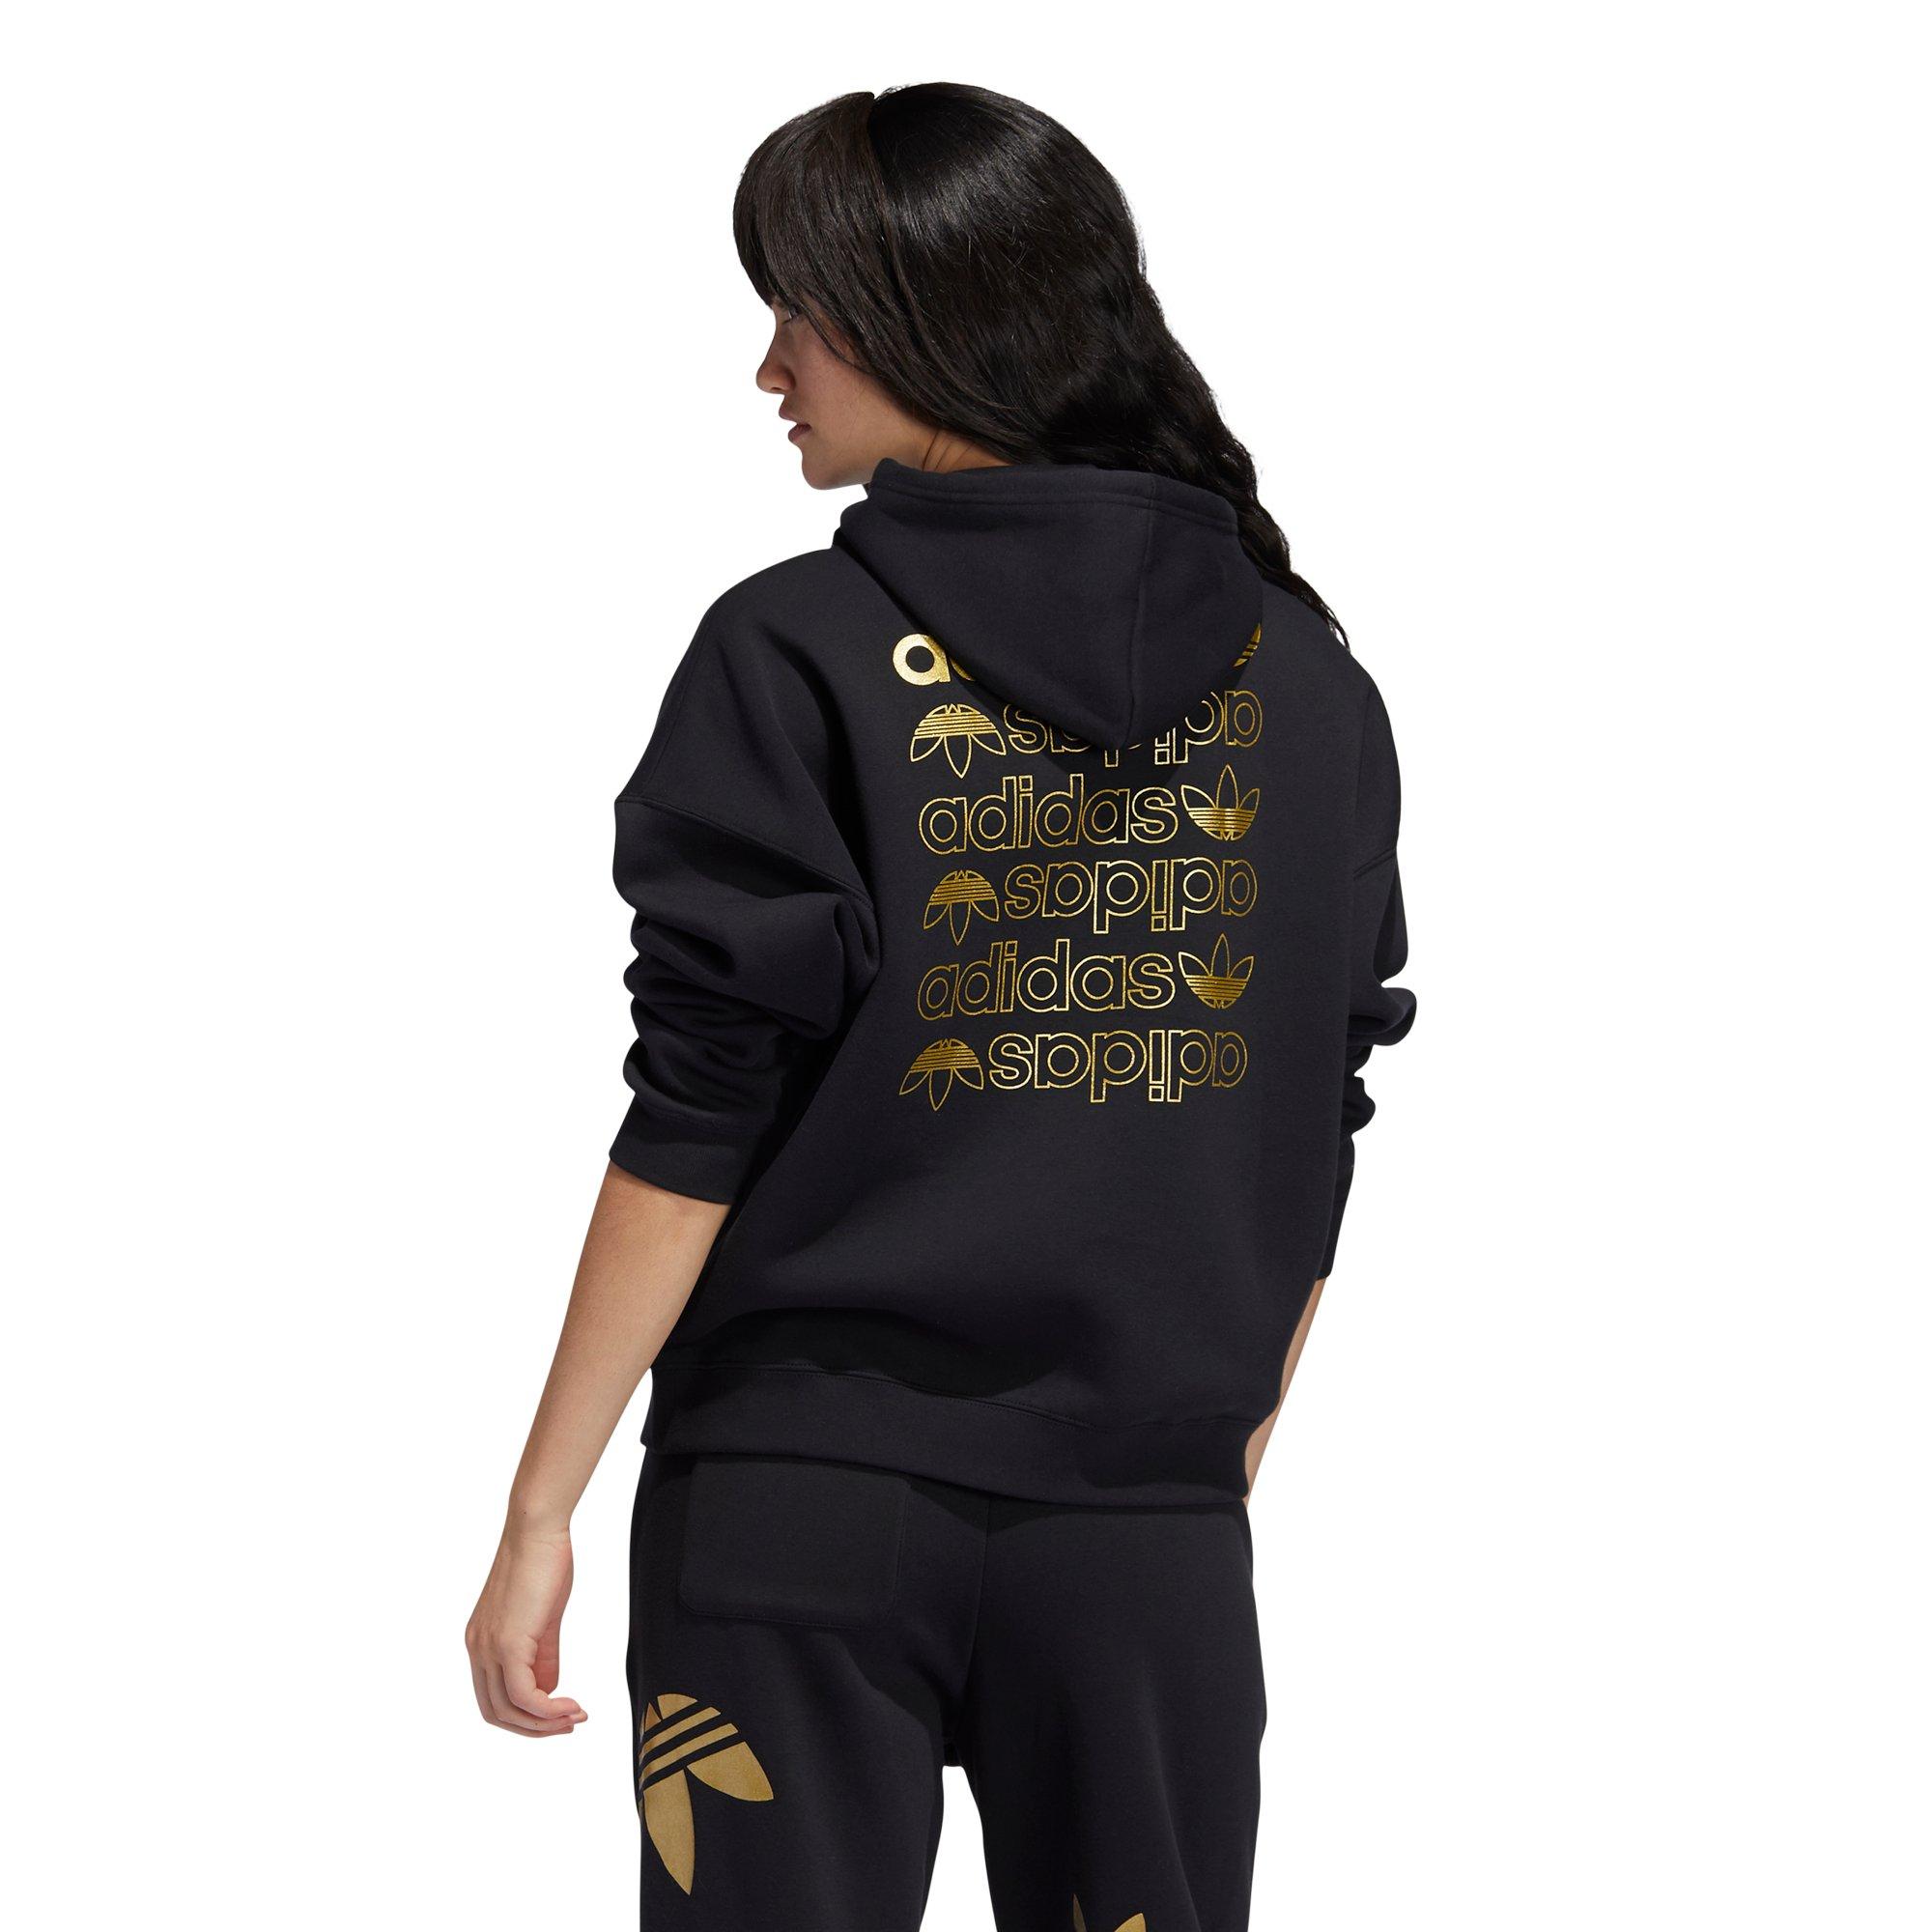 adidas hoodie with gold logo